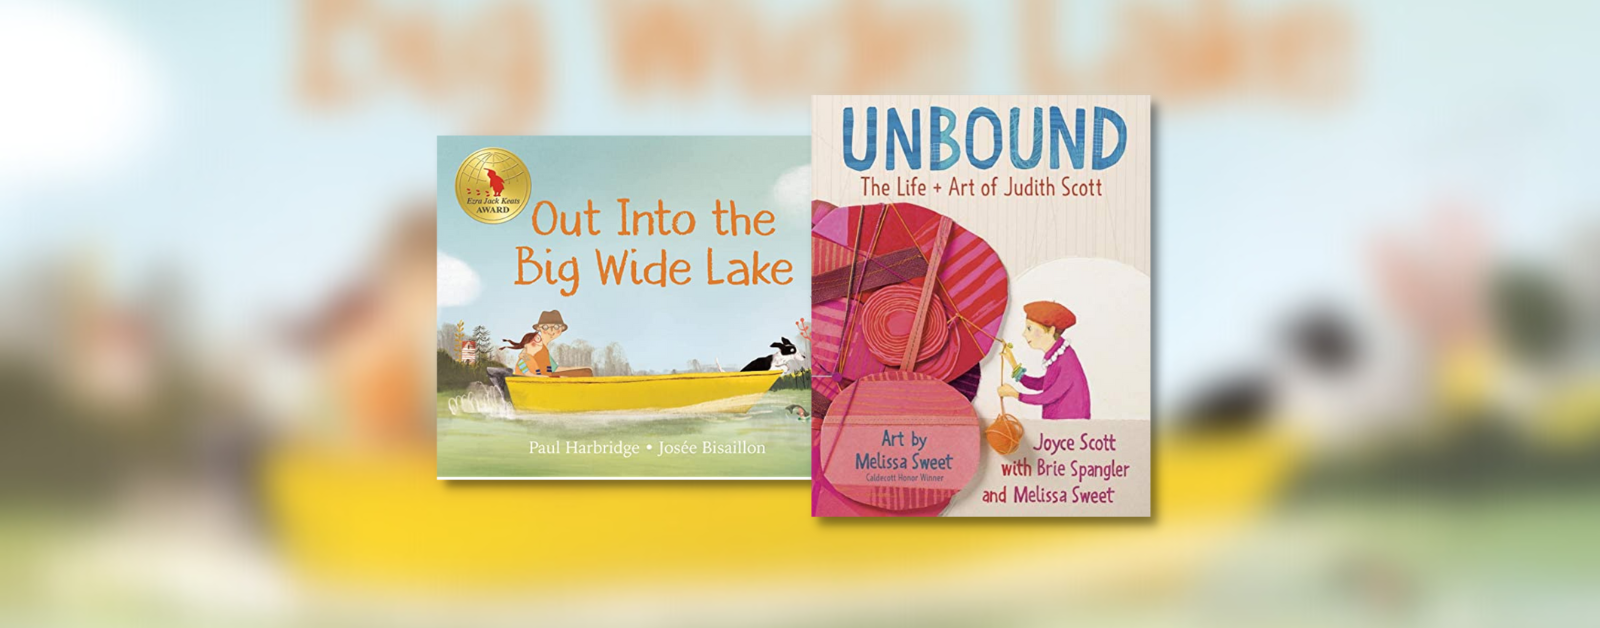 covers of two pictures books with characters who have Down syndrome: Out Into the Big Wide Lake and Unbound